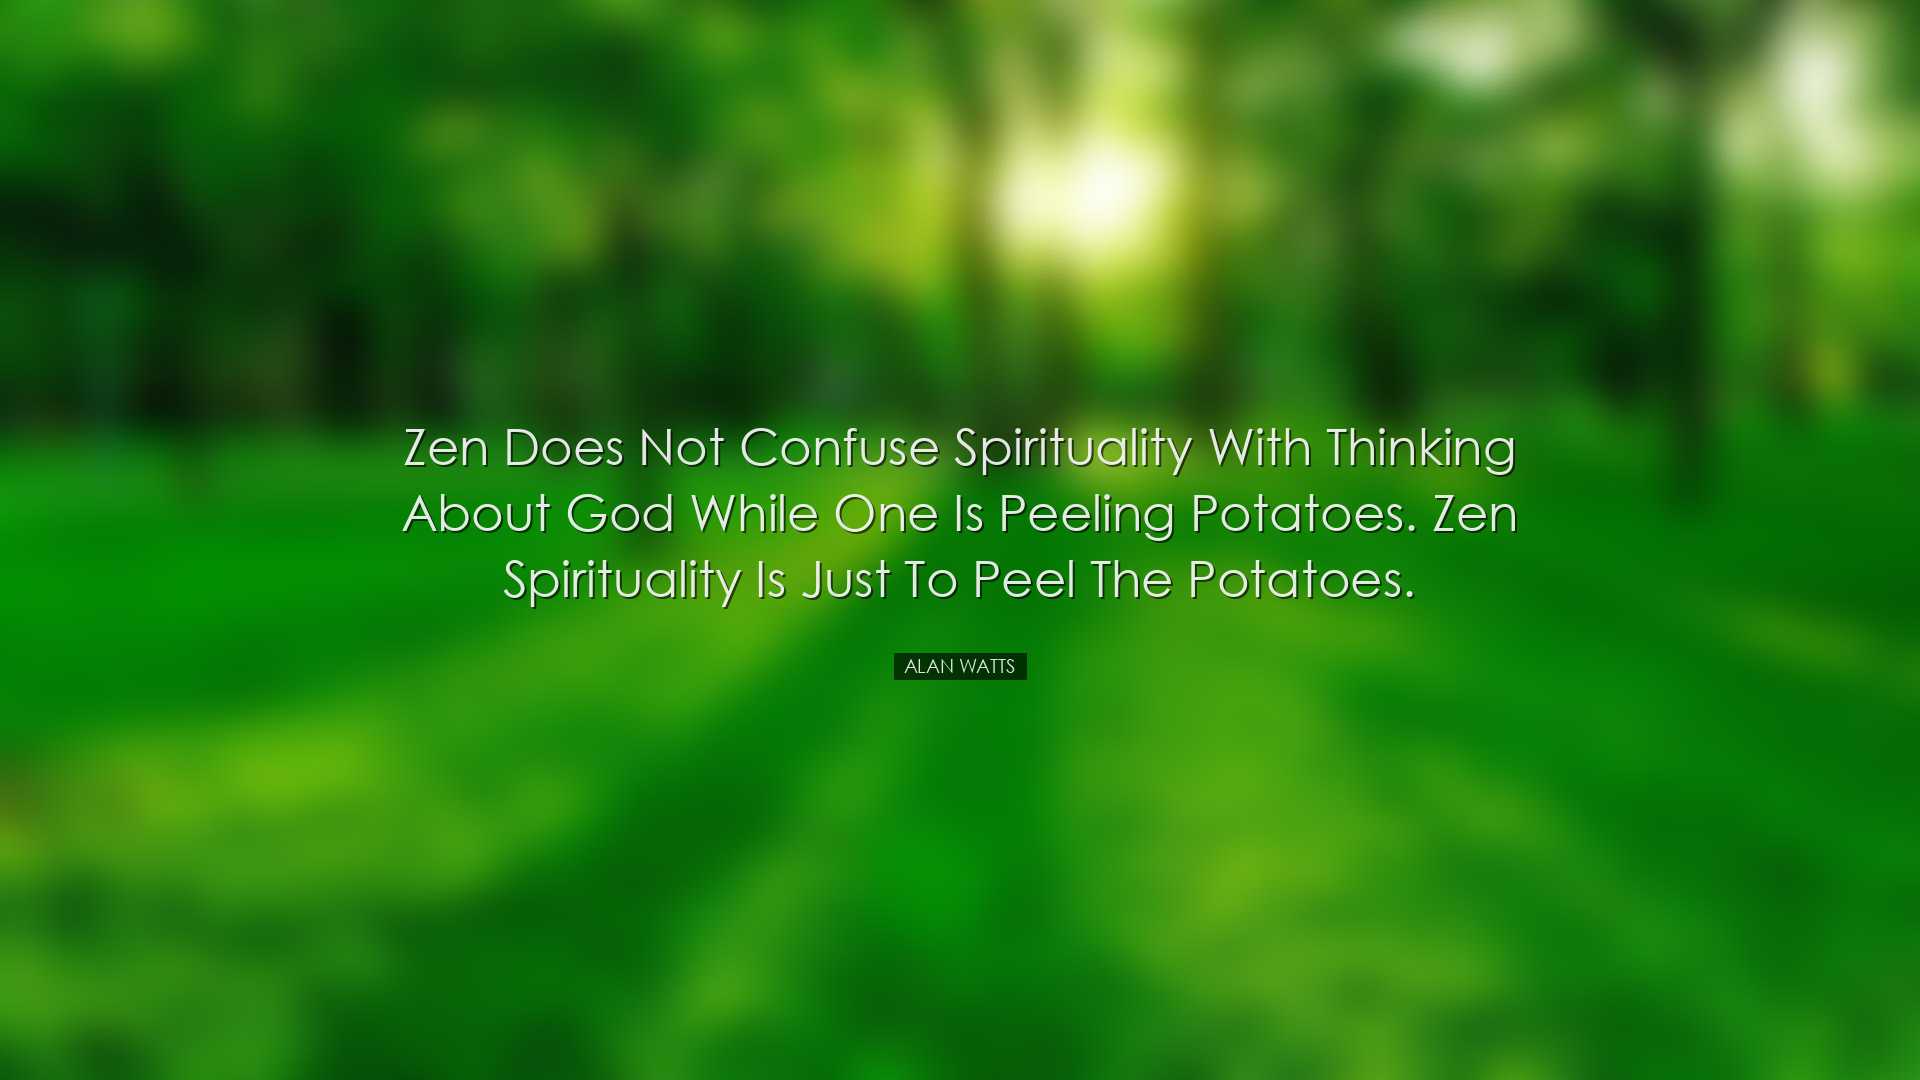 Zen does not confuse spirituality with thinking about God while on